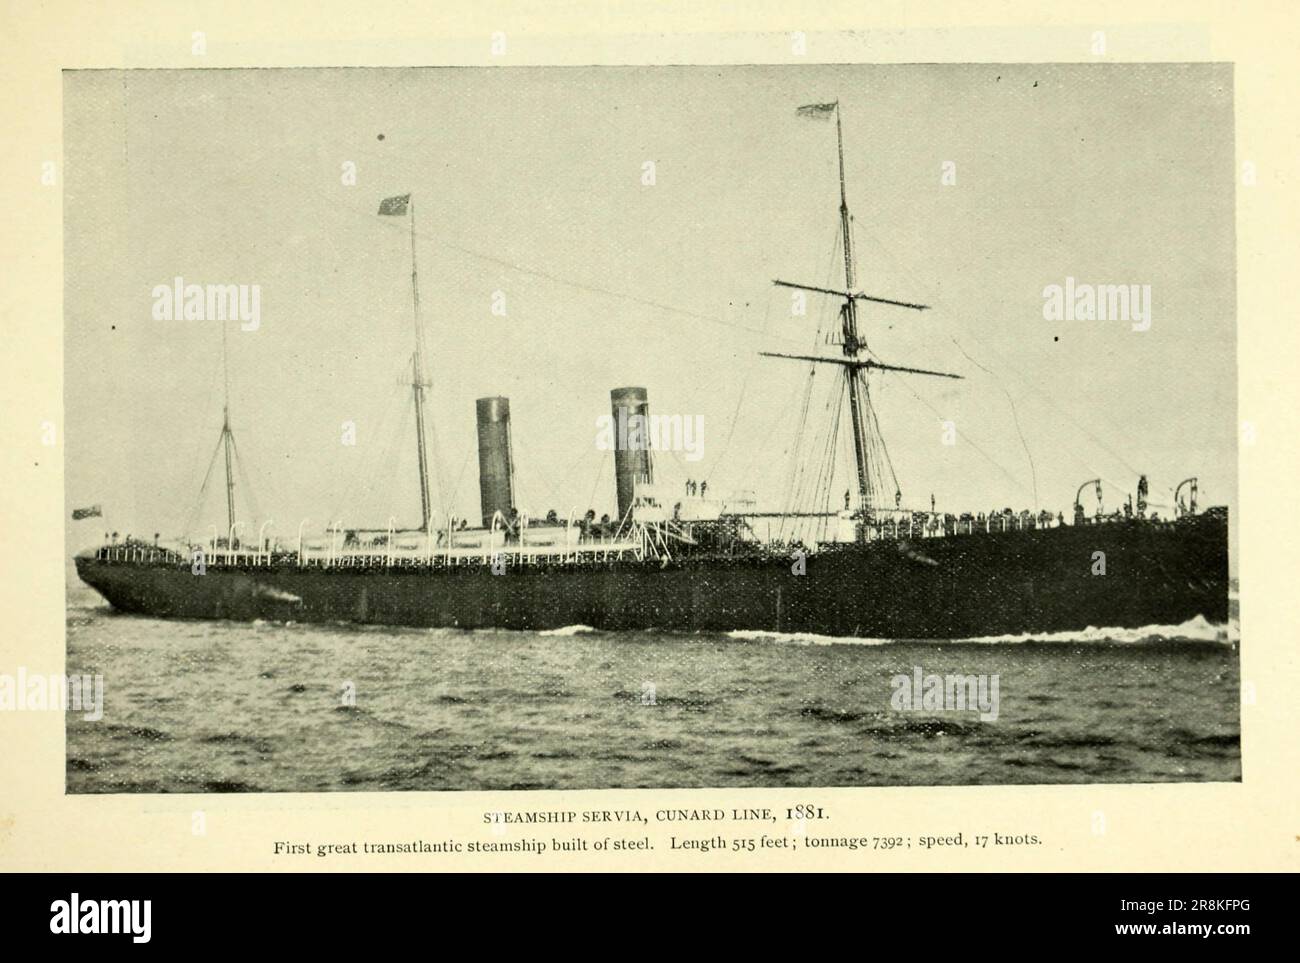 Cunard Line Steamship Servia 1881 First great Transatlantic Steamship built of steel. Length 515 feet tonnage 7392 speed 17 knots from the Article The Great Modern Transatlantic Steamships By Samuel Ward Stanton from The Engineering Magazine DEVOTED TO INDUSTRIAL PROGRESS Volume X October 1896 NEW YORK The Engineering Magazine Co Stock Photo